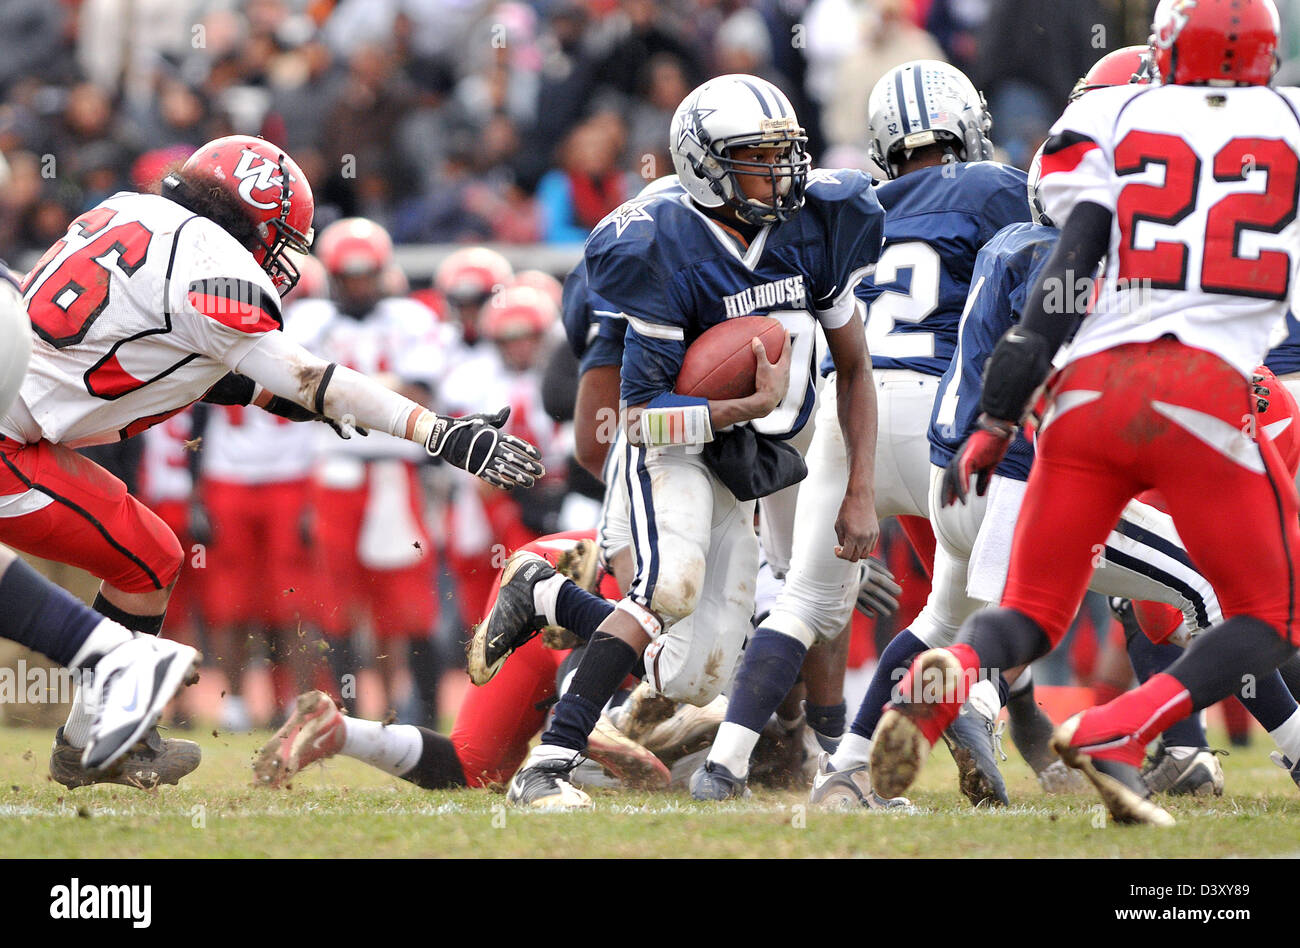 High school football game in New Haven CT USA between cross town rivals Wilbur Cross and Hillhouse High Schools Stock Photo